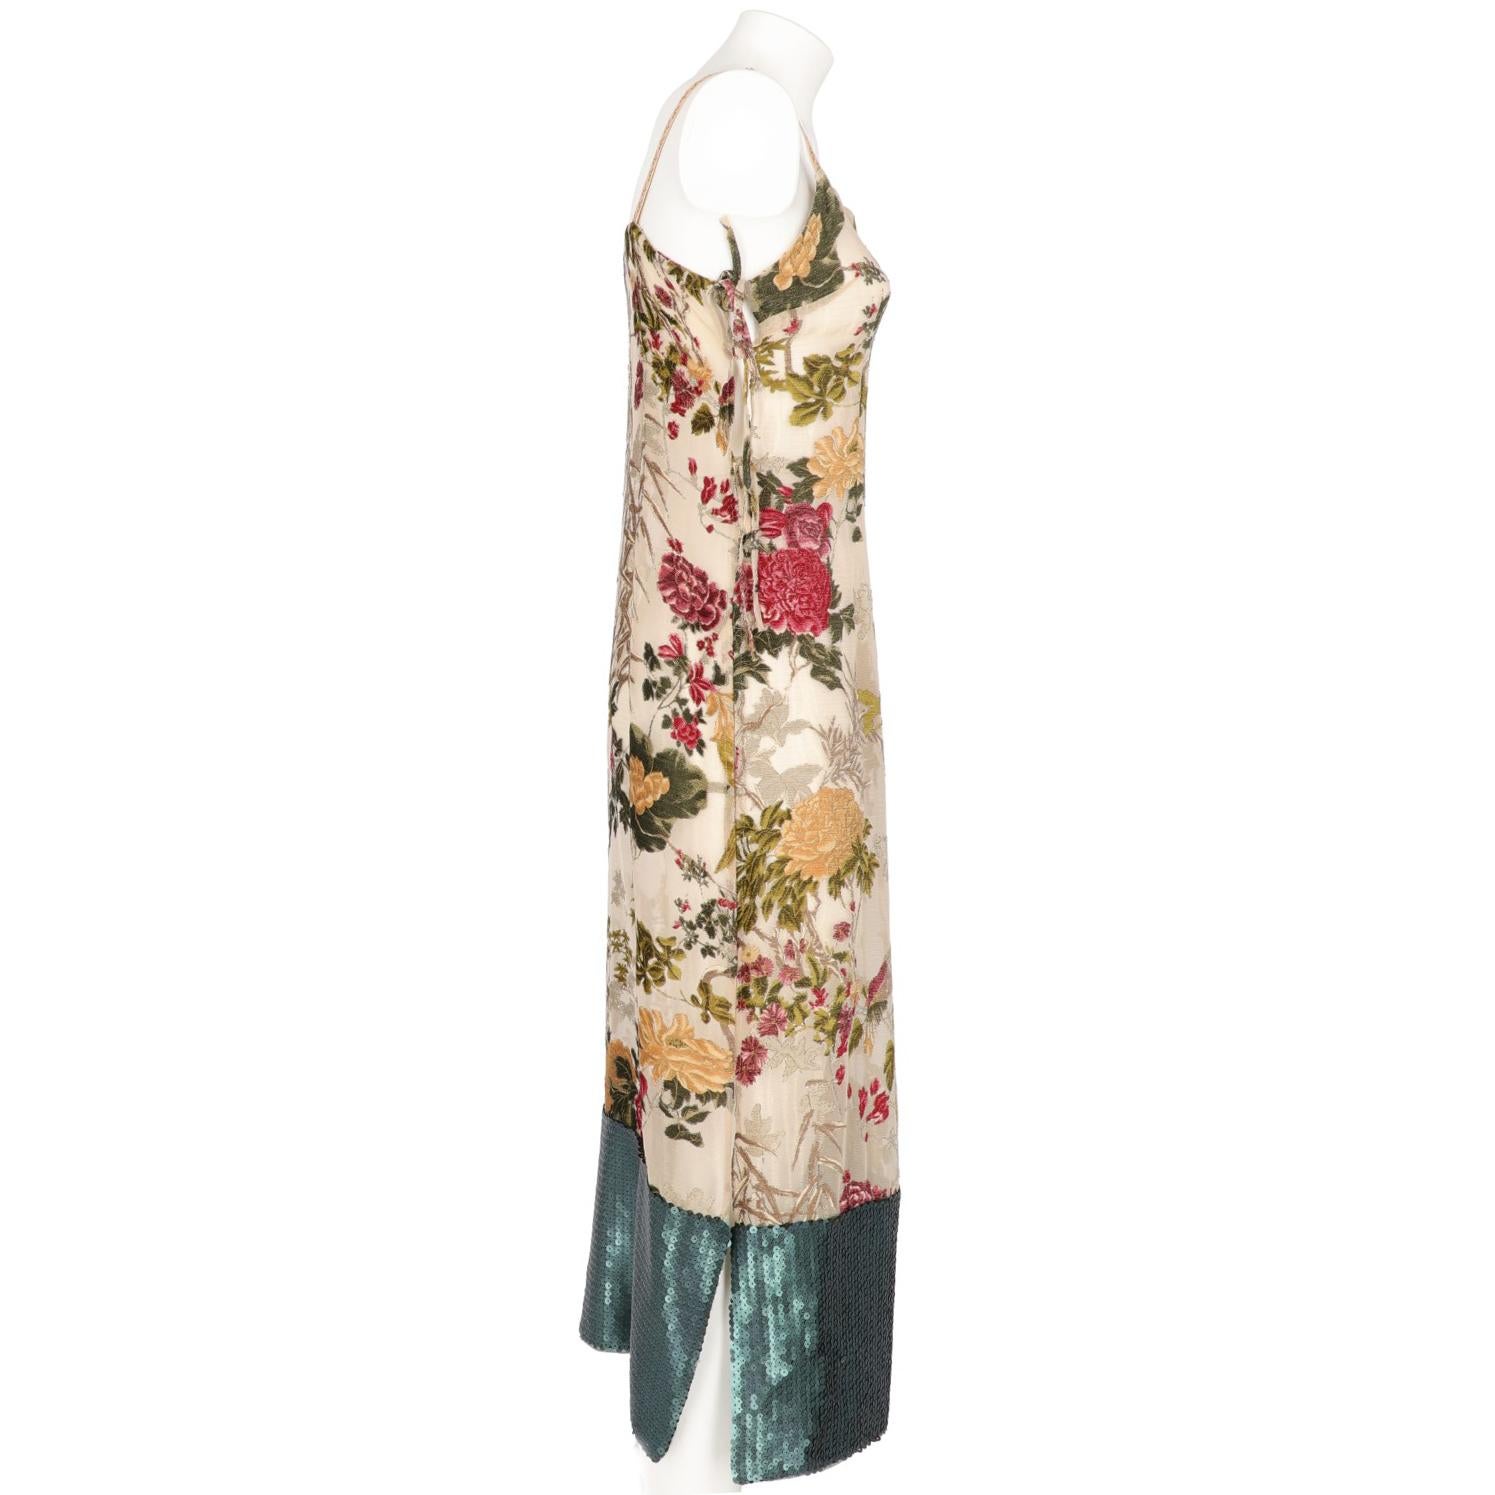 The lovely Antonio Marras beige and gold silk brocade long dress features  a colored flore & fauna chenille inserts and an elegant dark green sequin insert on the edges, with beige shoulder straps with flowers embroideries and adjustable strings on